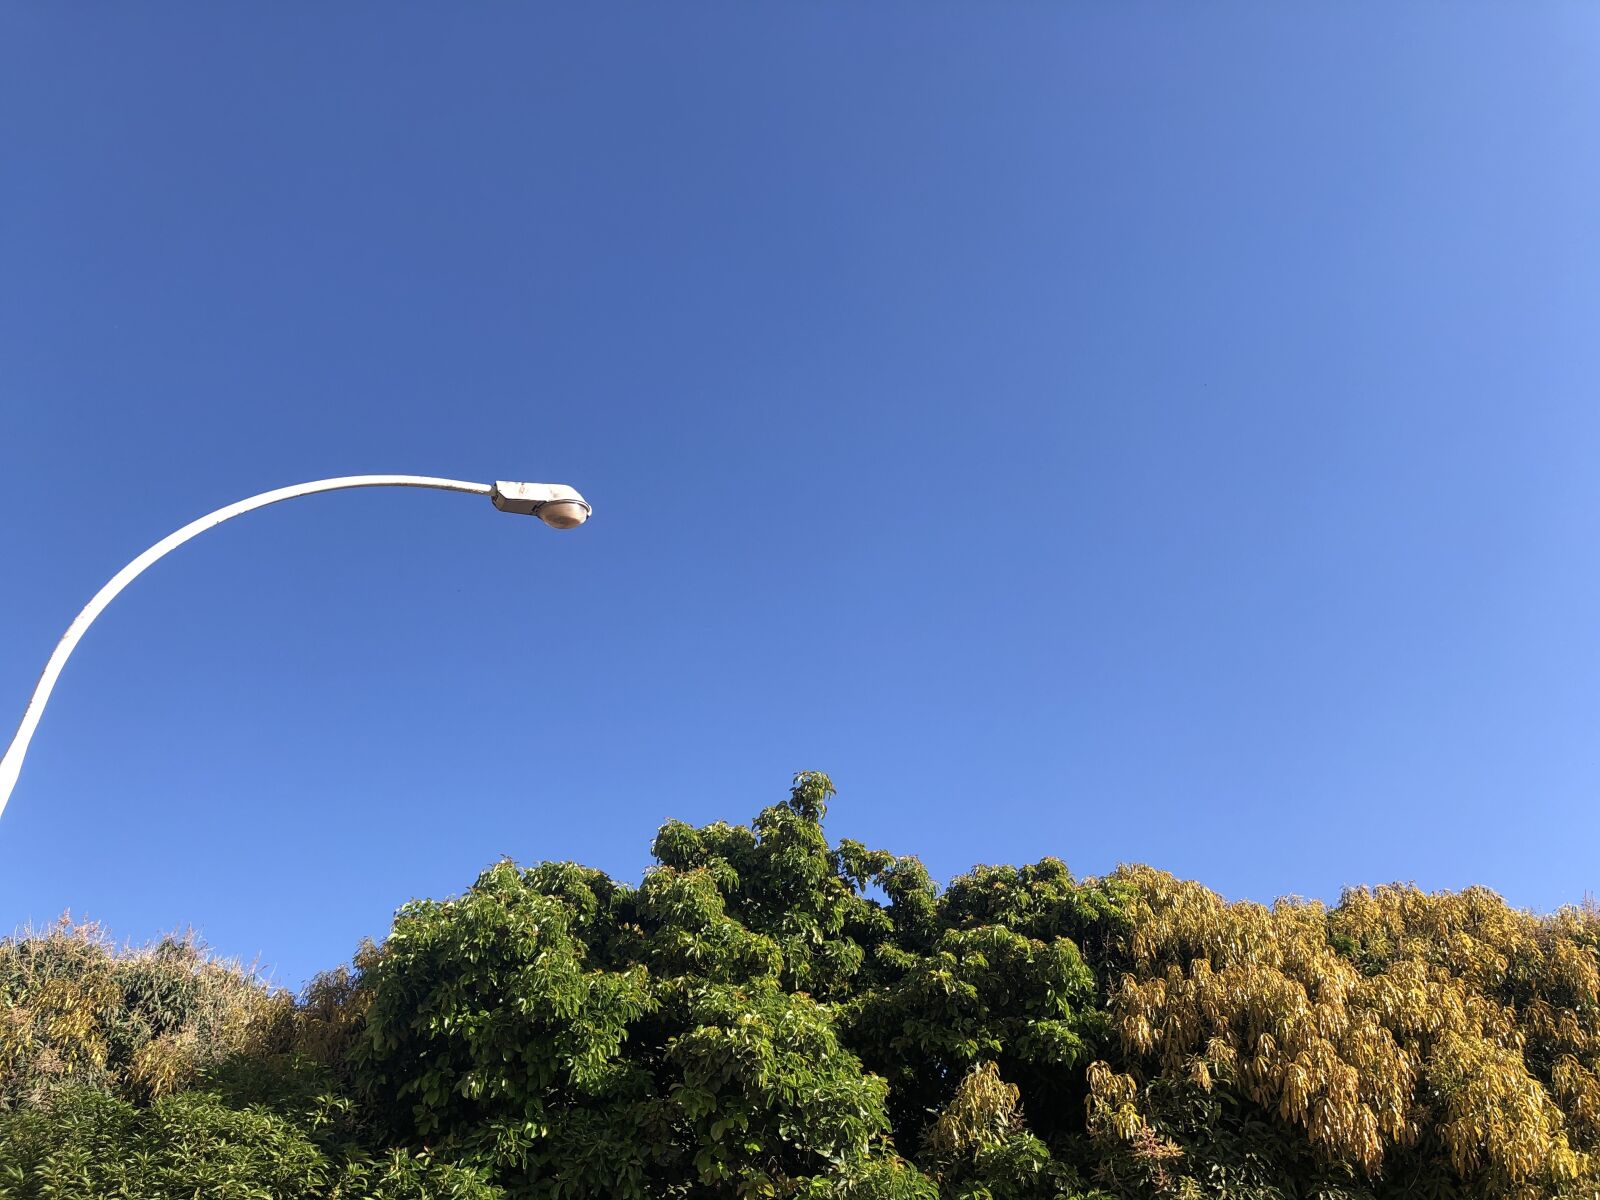 iPhone X back dual camera 4mm f/1.8 sample photo. Sky, trees, post photography